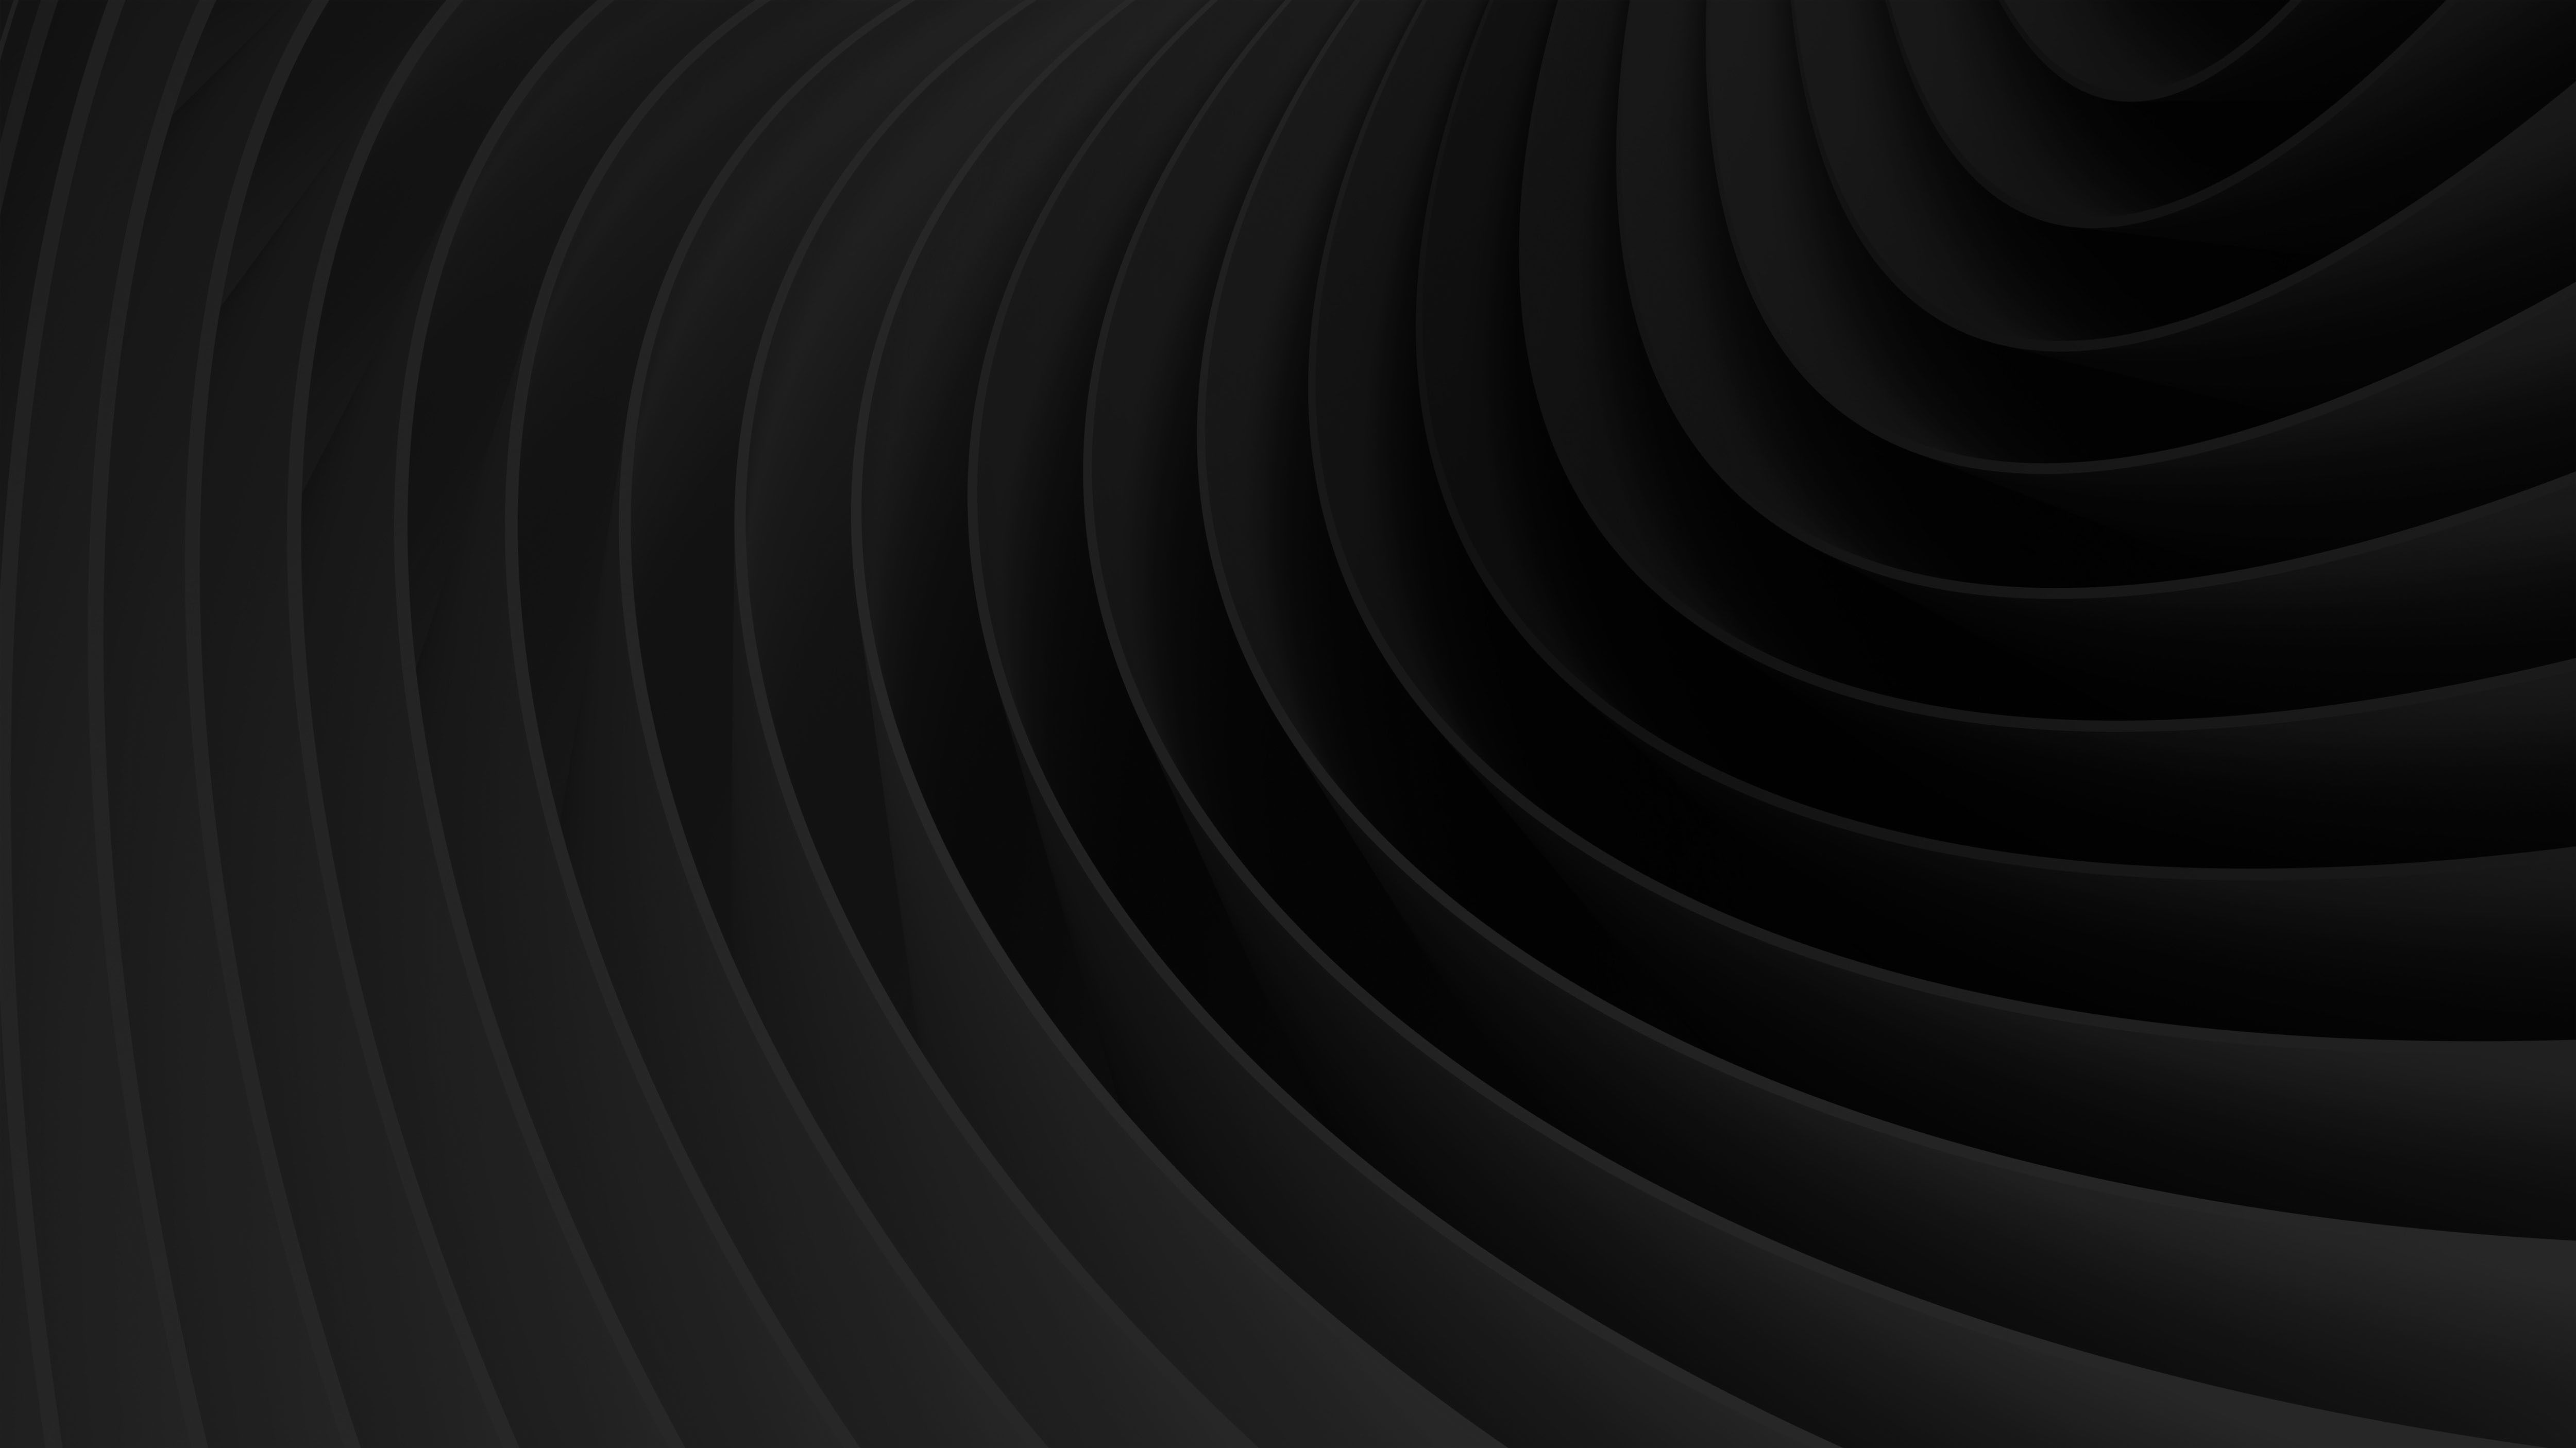  Abstract  Minimalism Black  Wallpapers  Wallpaper  Cave